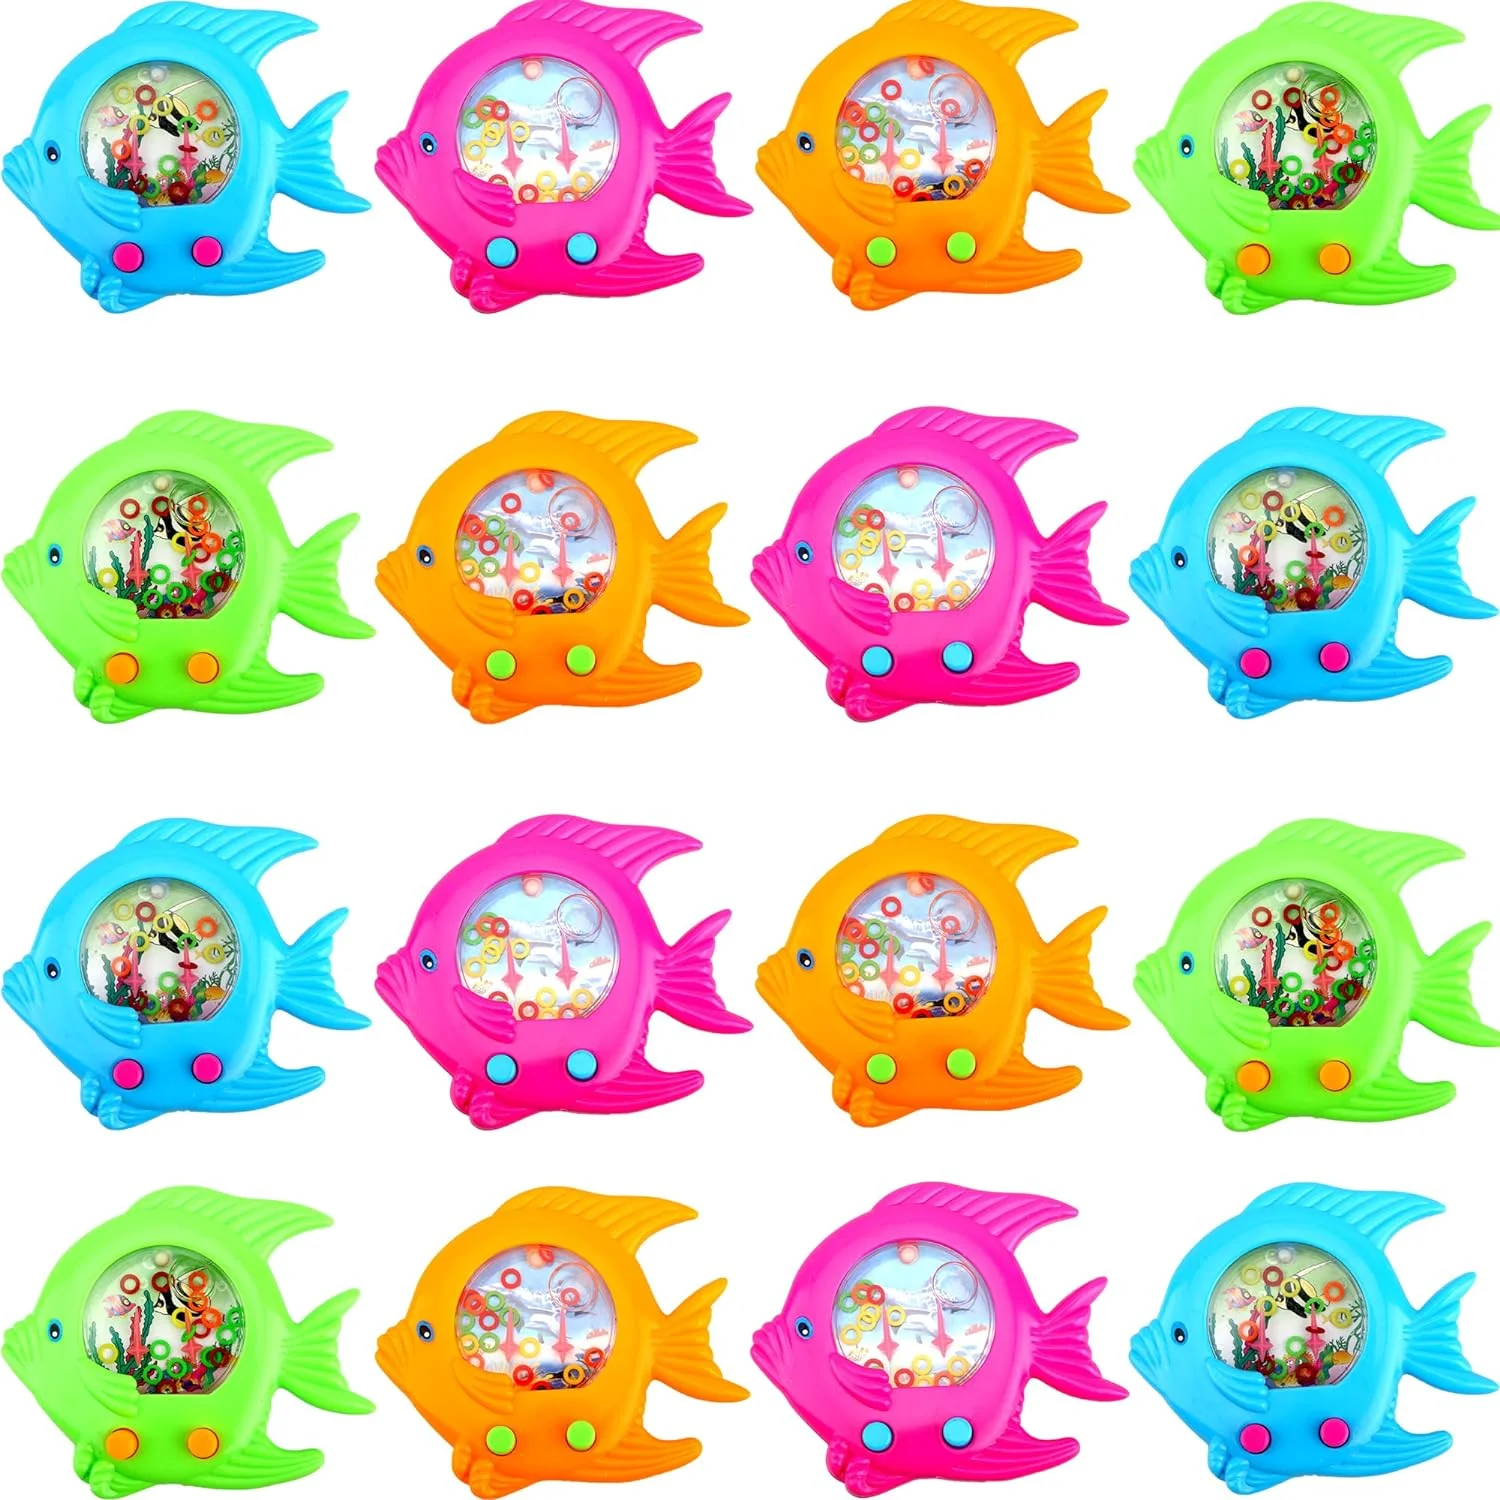 Cotiny 16 Pieces Fish Ring Toss Games Handheld Water Fish Colorful Arcade Retro Pocket Toys for Kids Retro Game Party Favors Game Prizes Travel Pastime Review 1